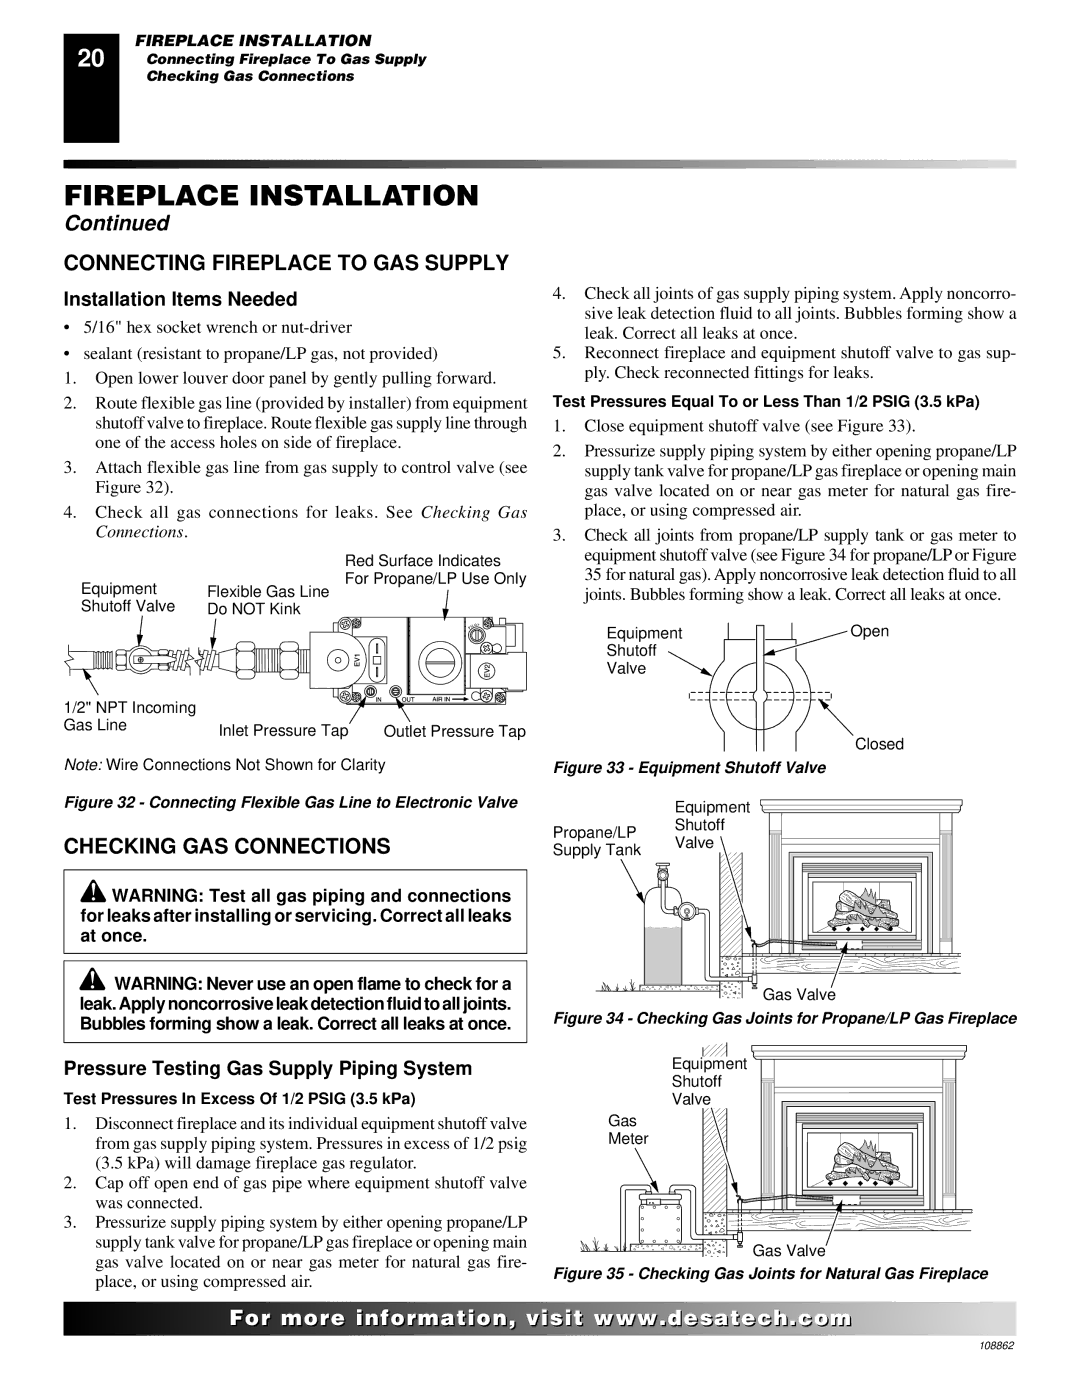 Desa (V)V36EN installation manual Connecting Fireplace to GAS Supply, Checking GAS Connections, Installation Items Needed 